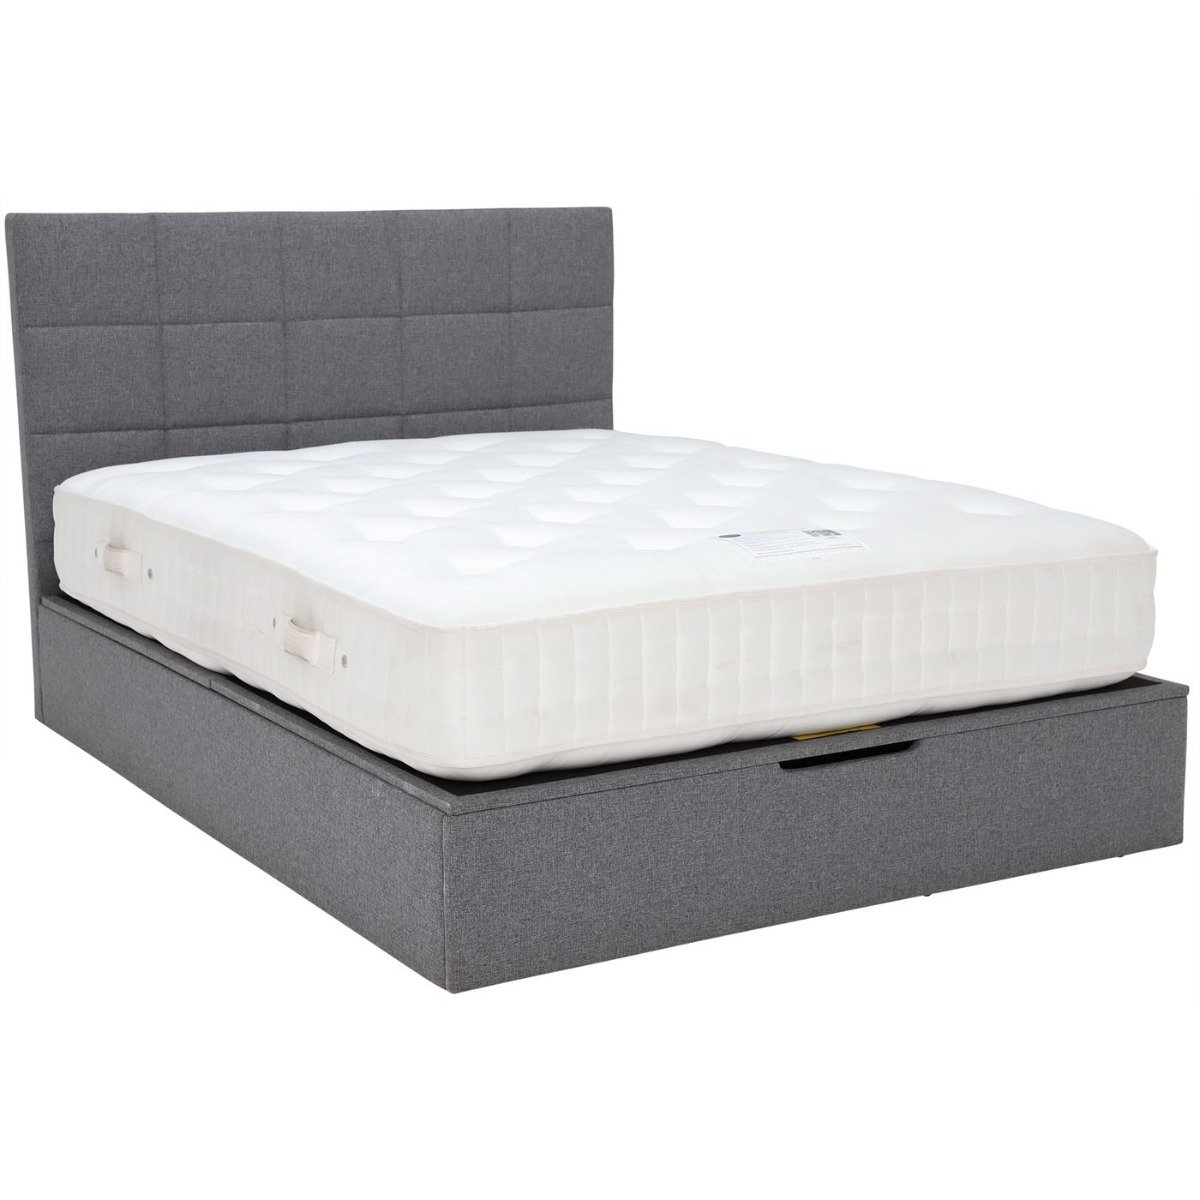 Souter Ottoman Bed Frame 135Cm, Grey | Double | Barker & Stonehouse